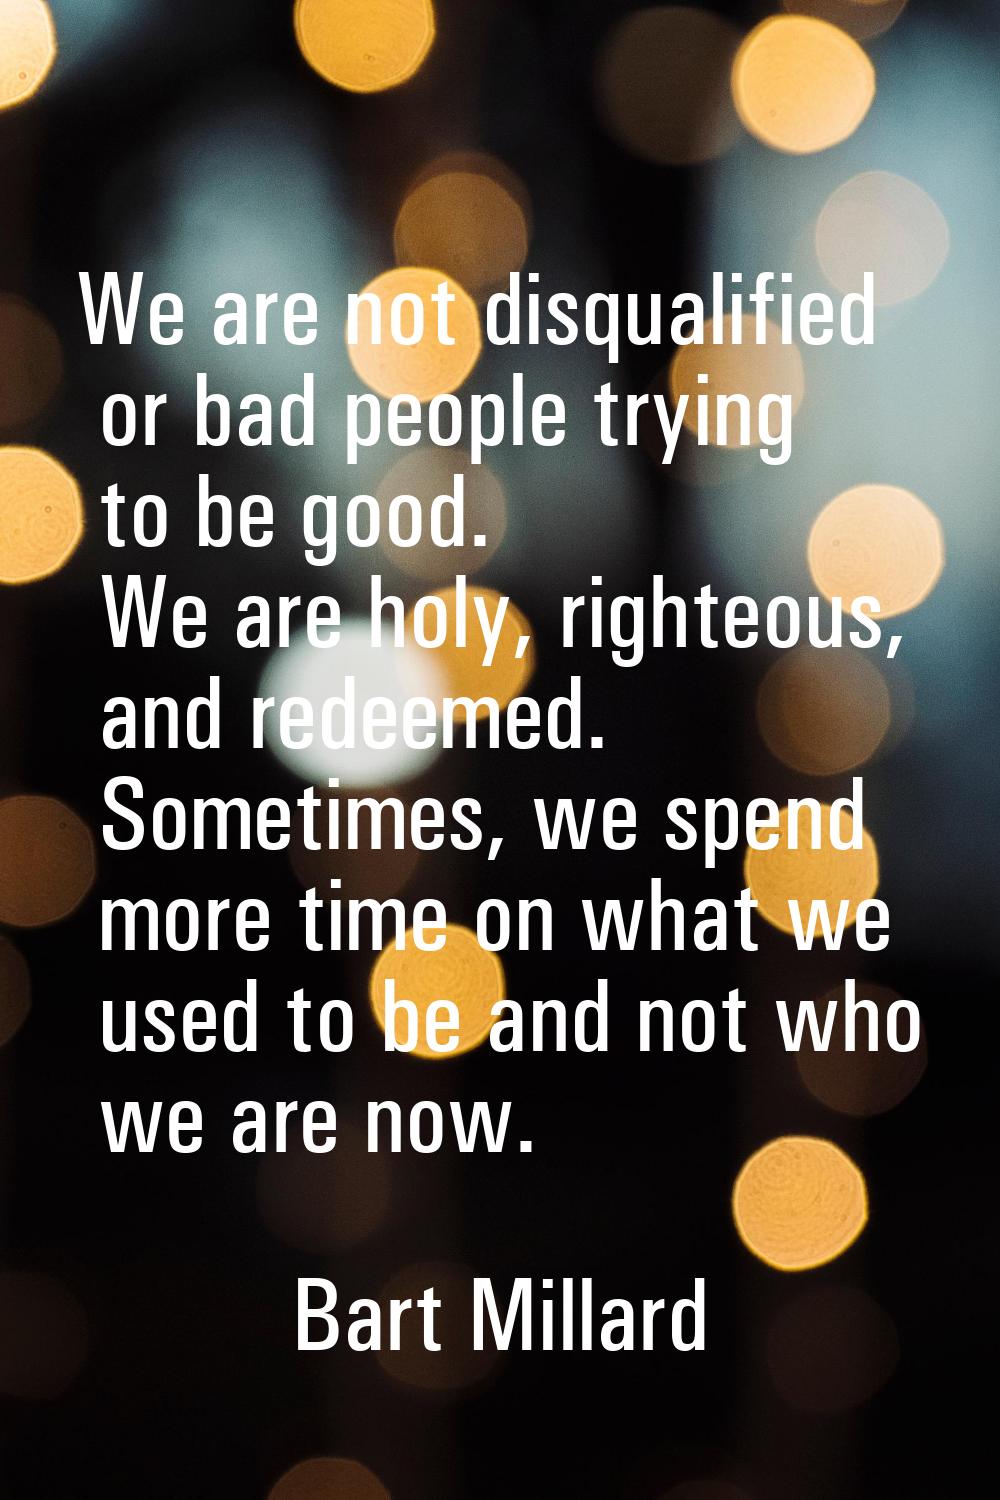 We are not disqualified or bad people trying to be good. We are holy, righteous, and redeemed. Some